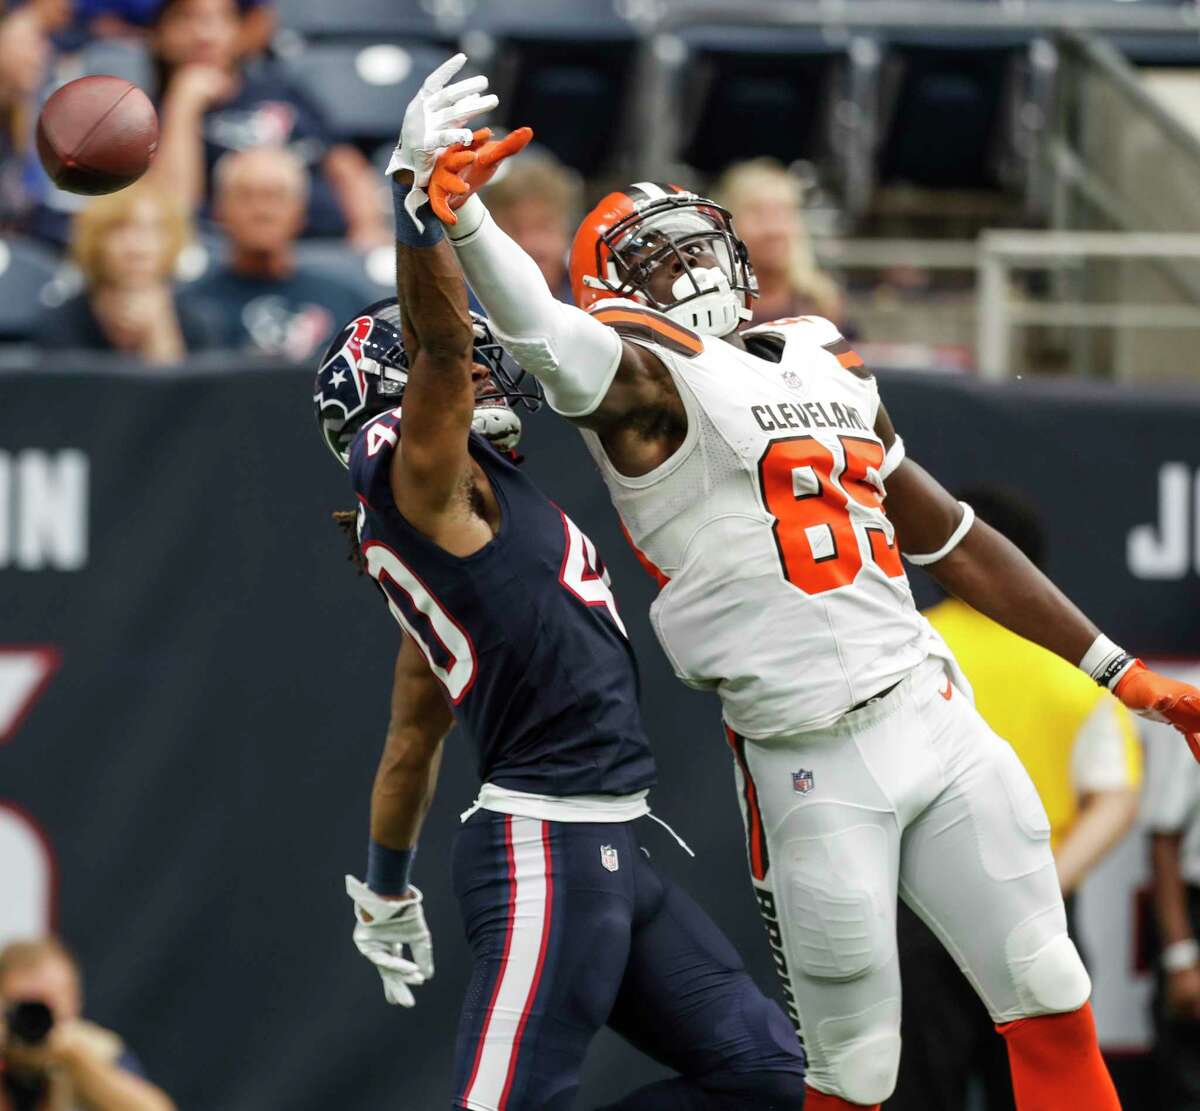 Houston Texans cornerback Marcus Williams (40) breaks up a pass intended for Cleveland Browns tight end David Njoku (85) during the fourth quarter of an NFL football game at NRG Stadium on Sunday, Oct. 15, 2017, in Houston.